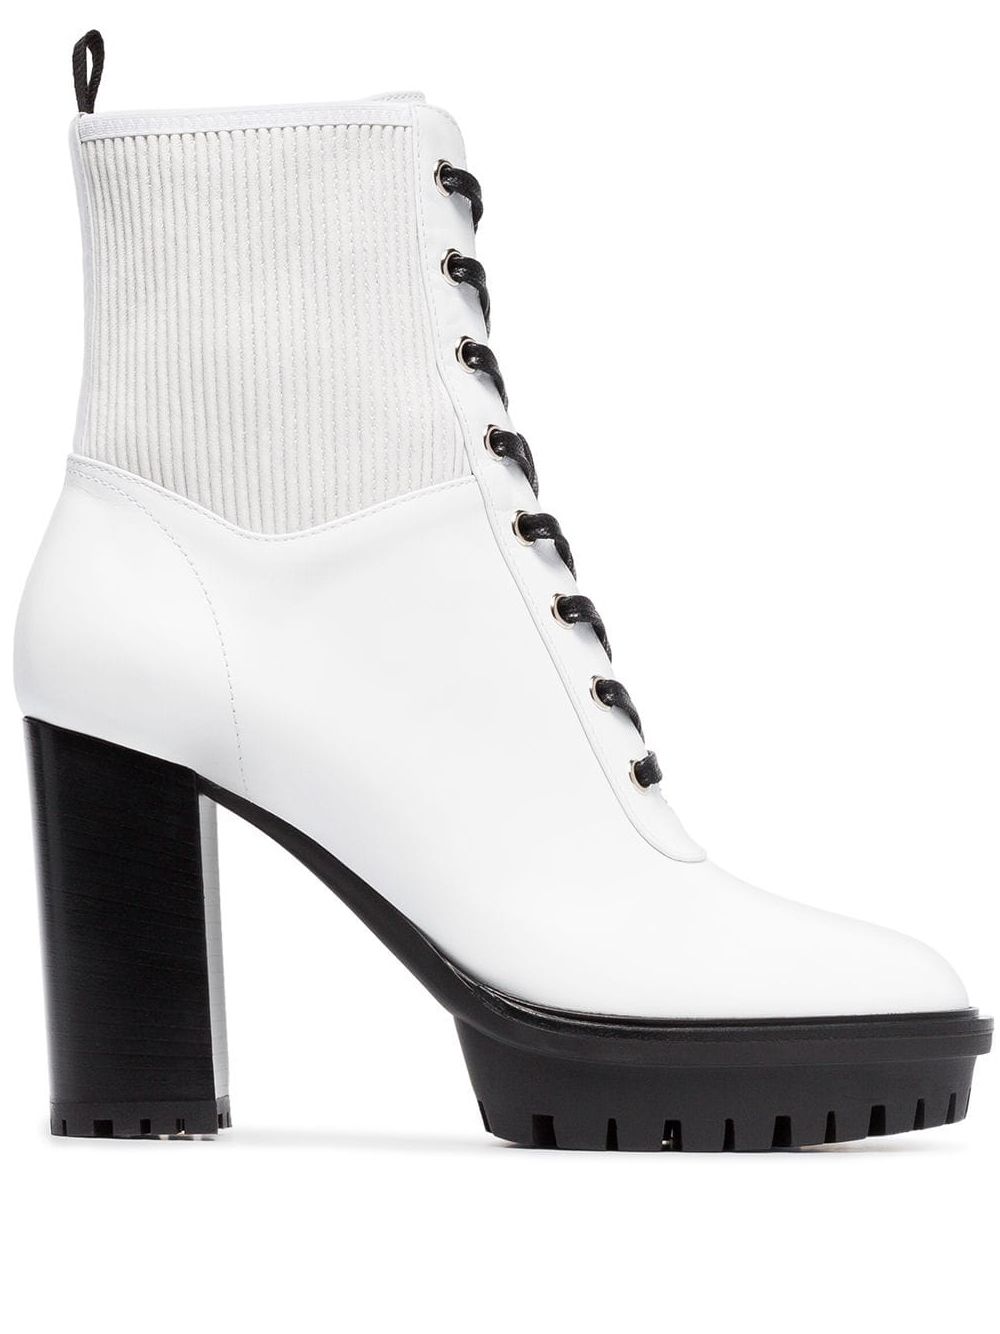 GIANVITO ROSSI WHITE 70 LACEUP LEATHER BOOTS